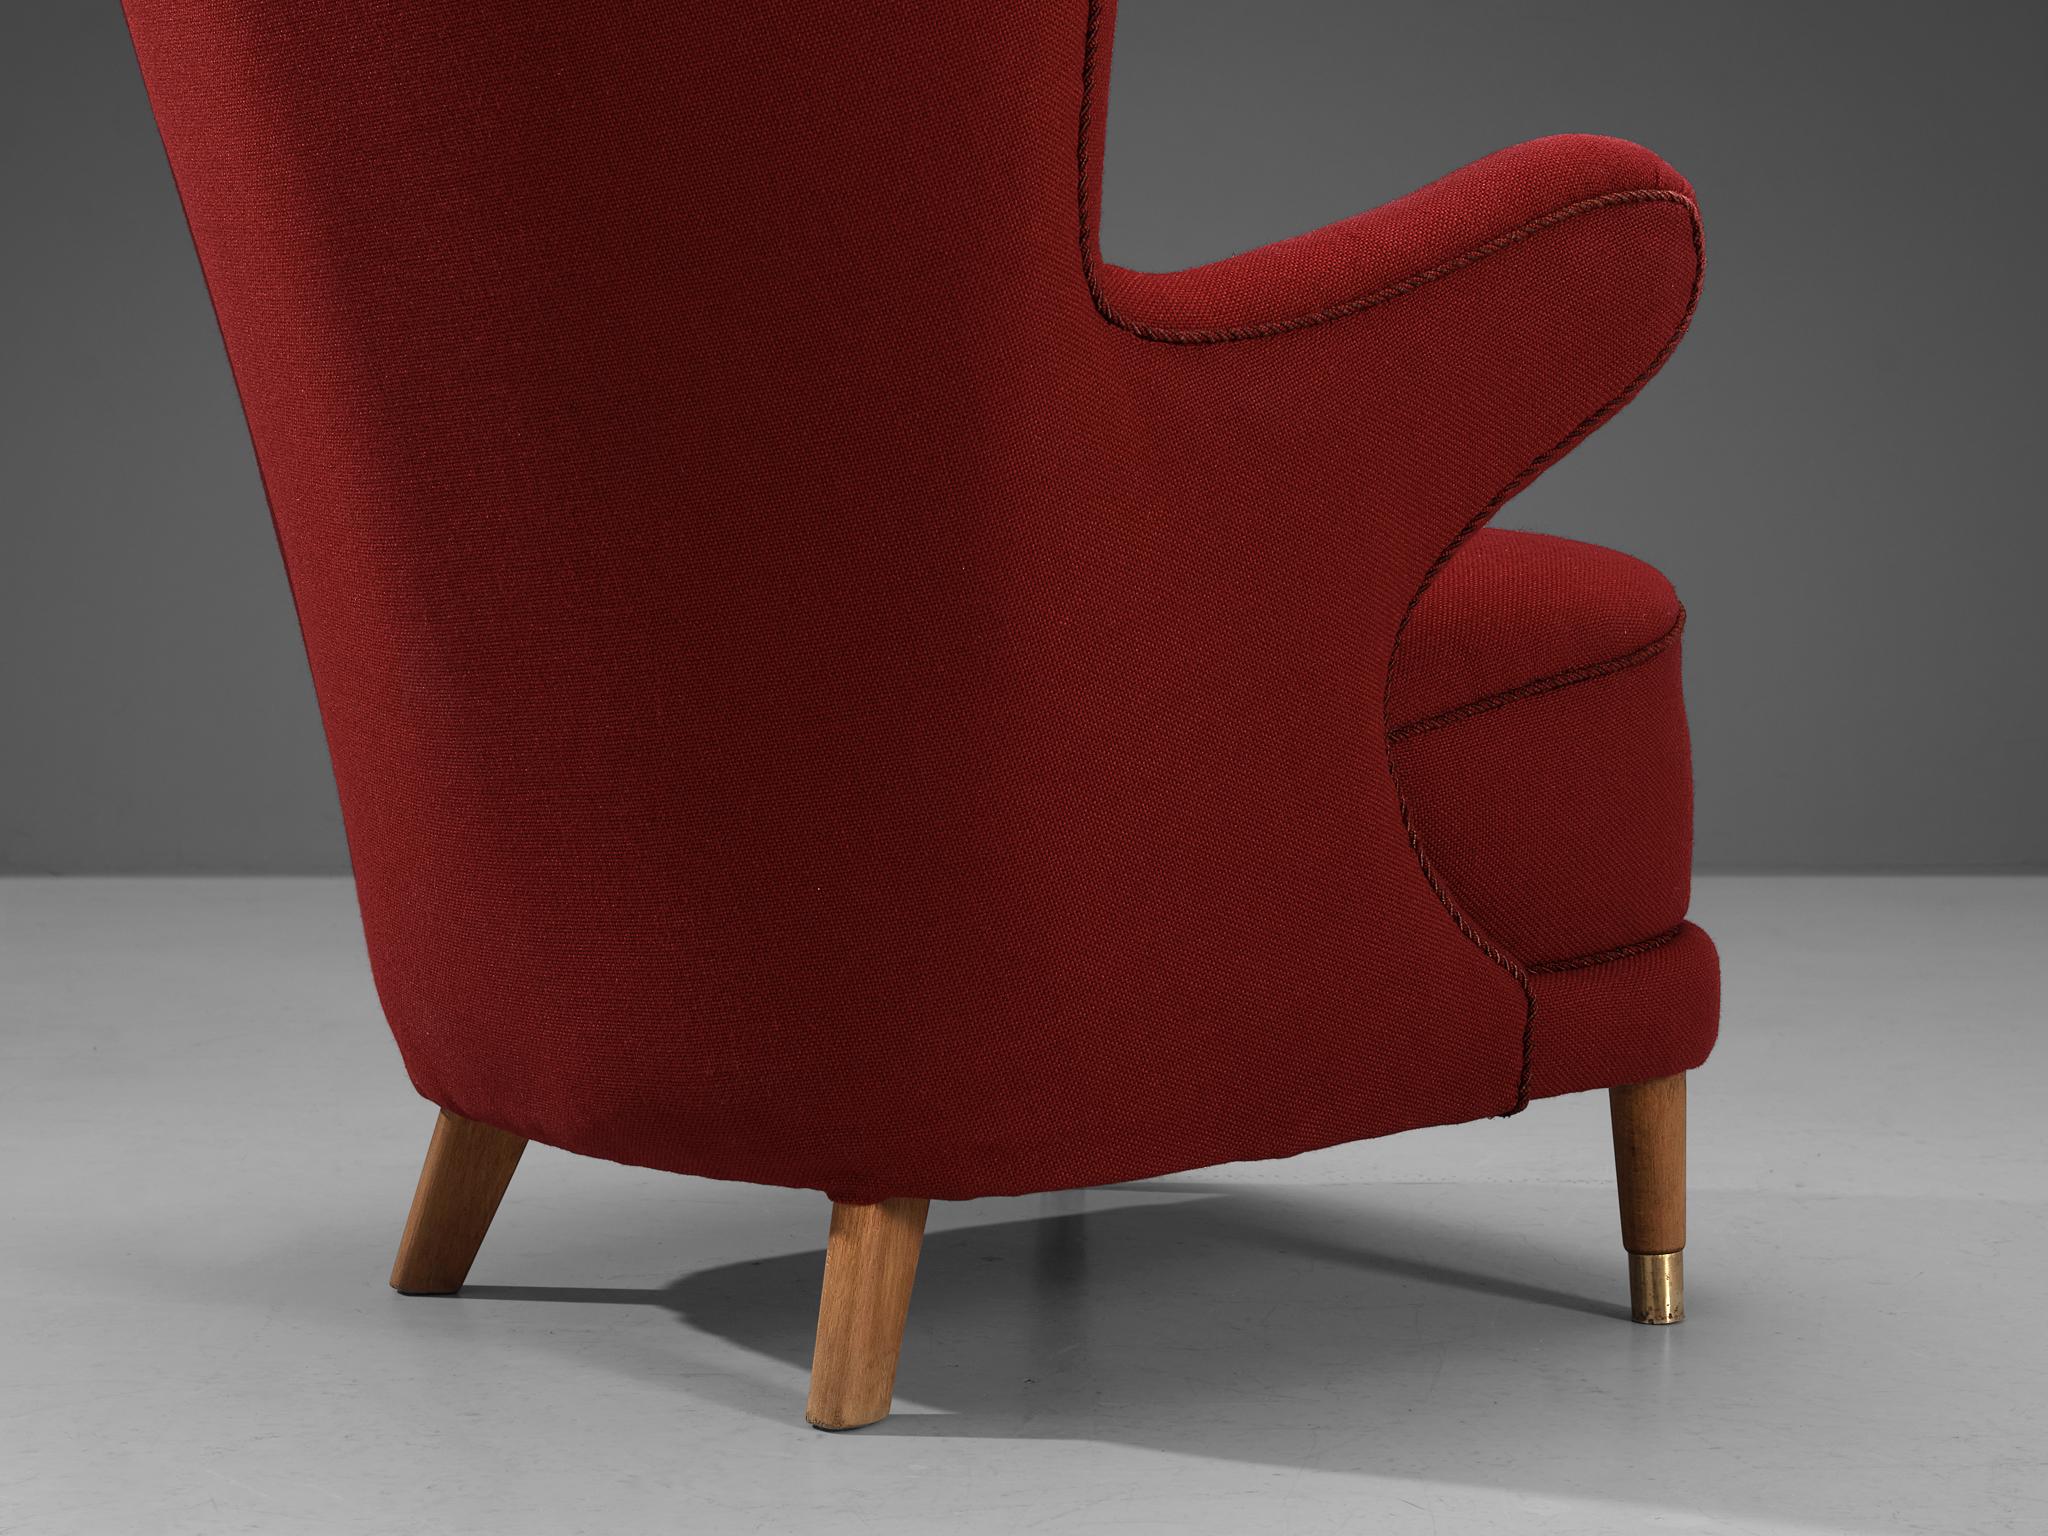 Mid-20th Century Danish Lounge Chair in Red Upholstery For Sale